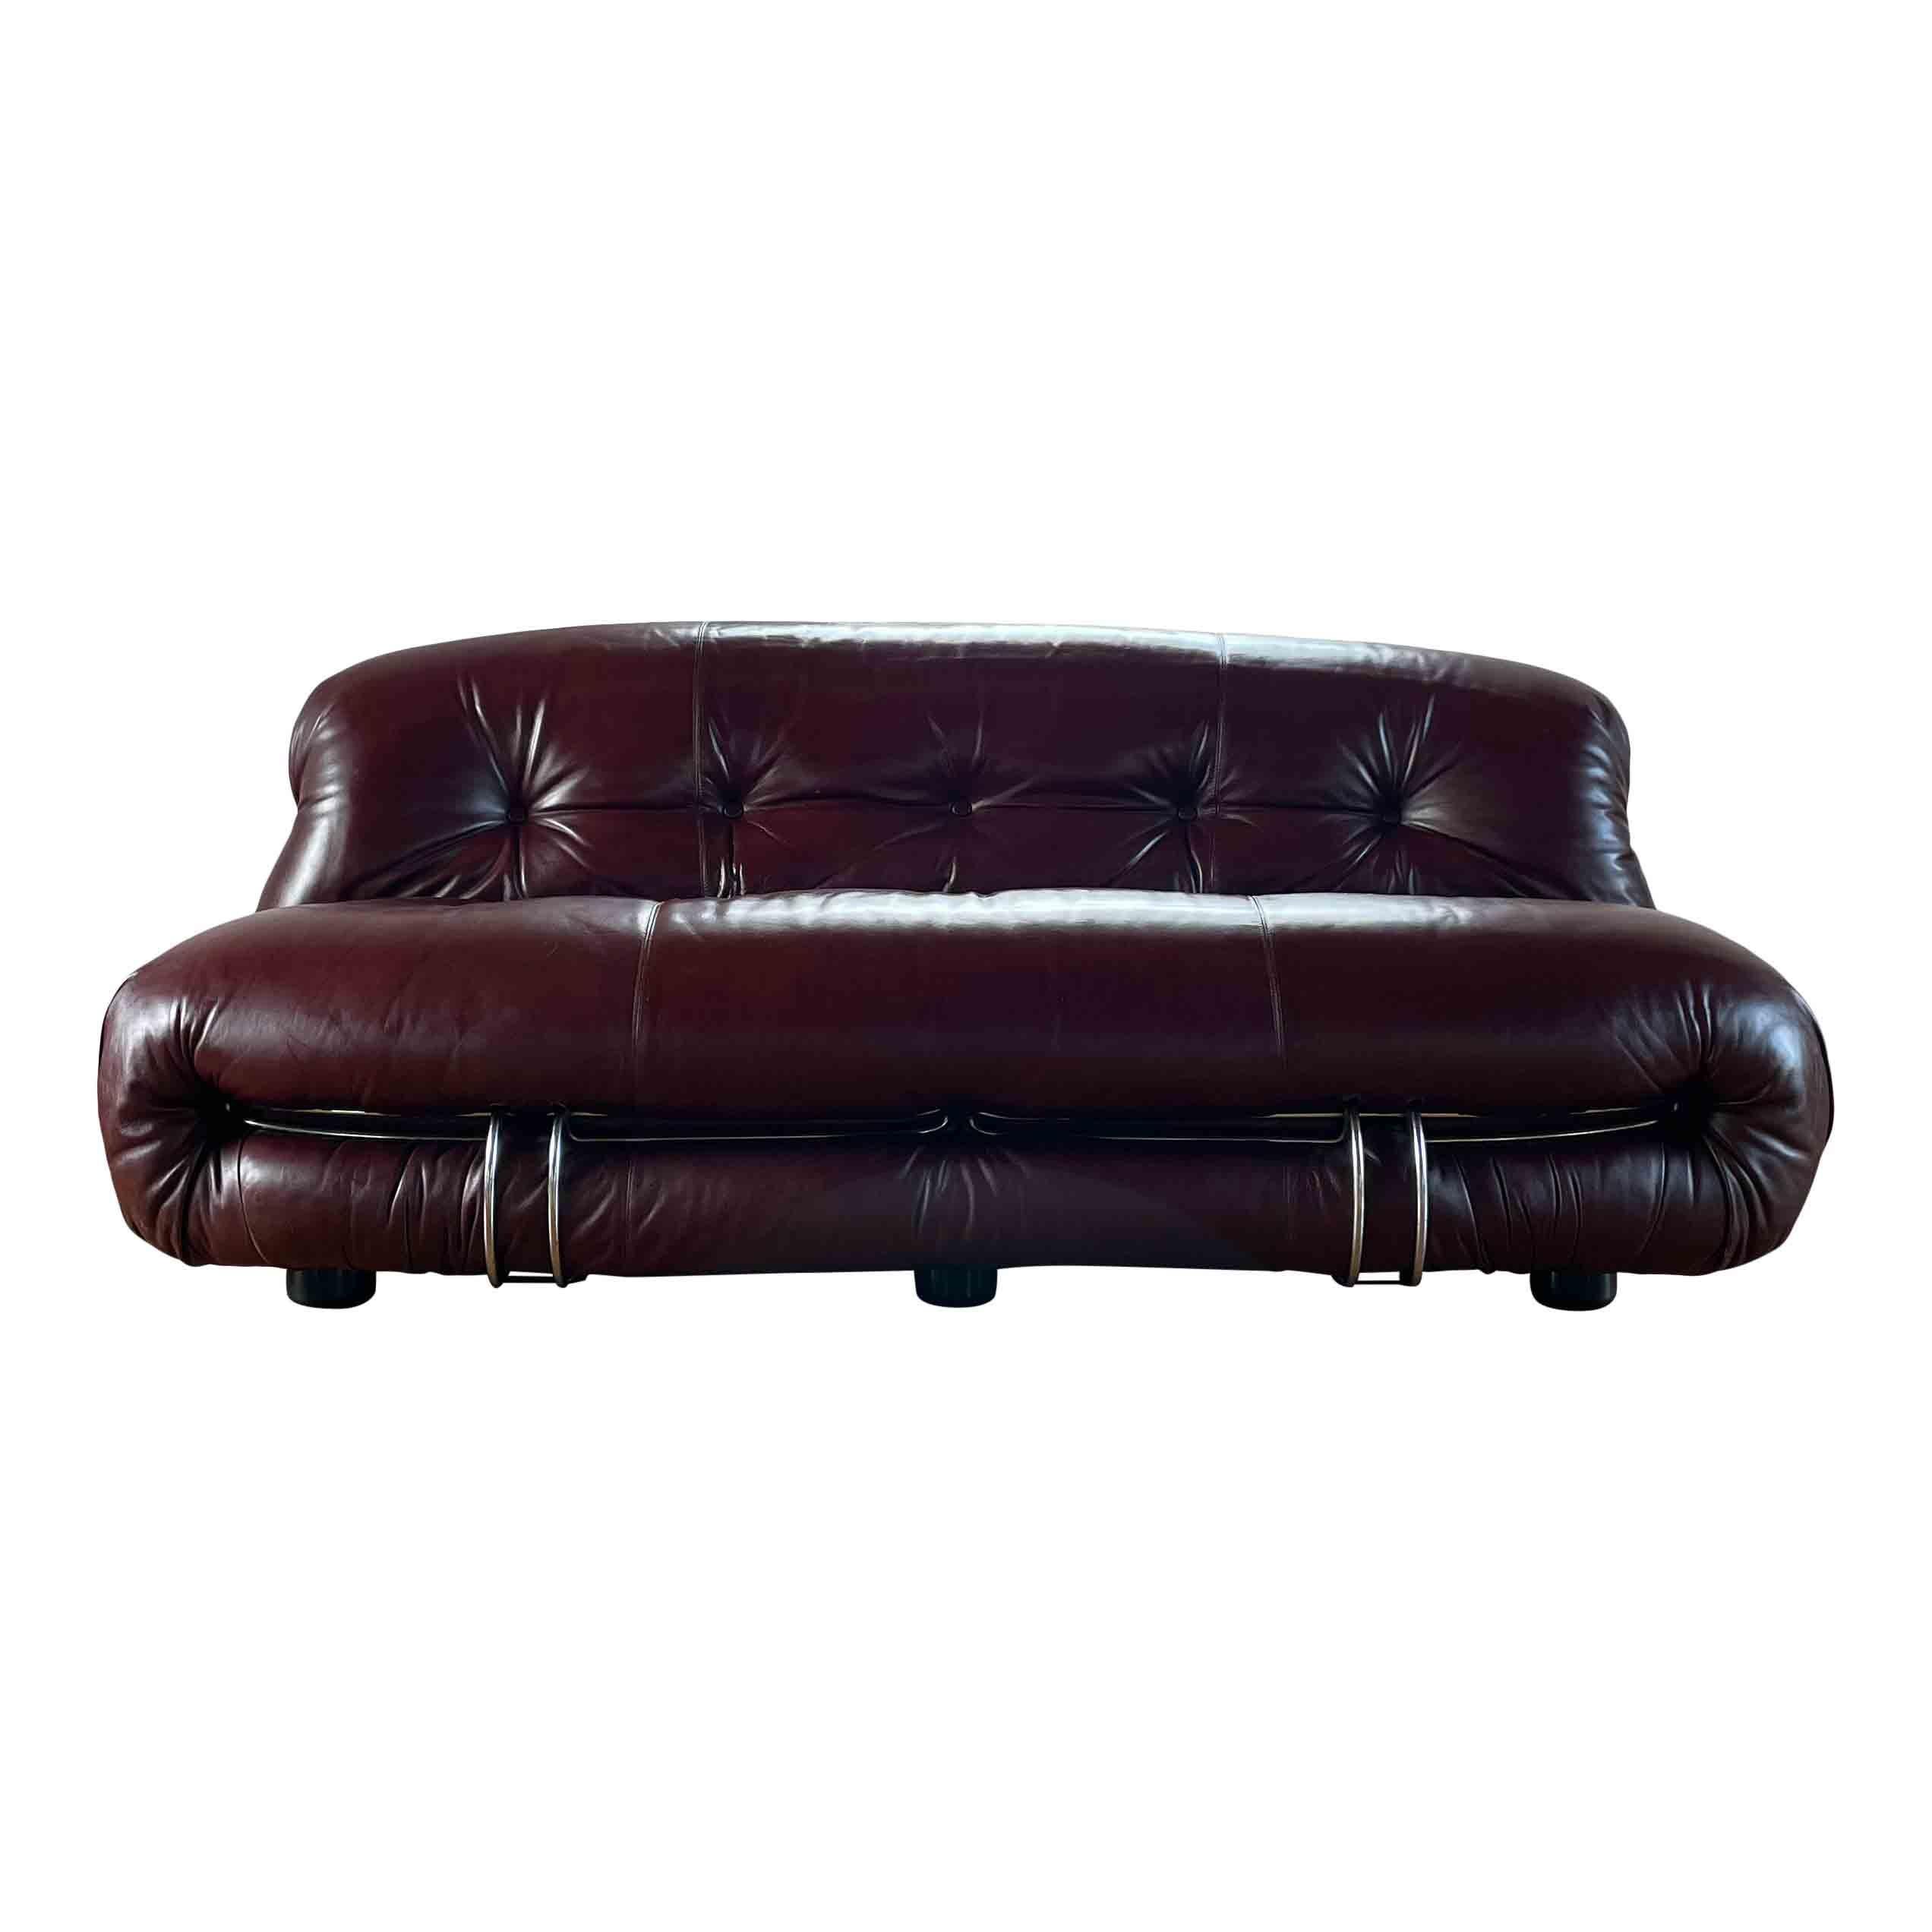 Soriana two-seater sofa, designed by Afra and Tobia Scarpa, and produced by the Italian manufacturer Cassina in 1969.
It features its original brown leather upholstery.
Winner of the “Compasso d’Oro” prize in 1970, it is one of their notable